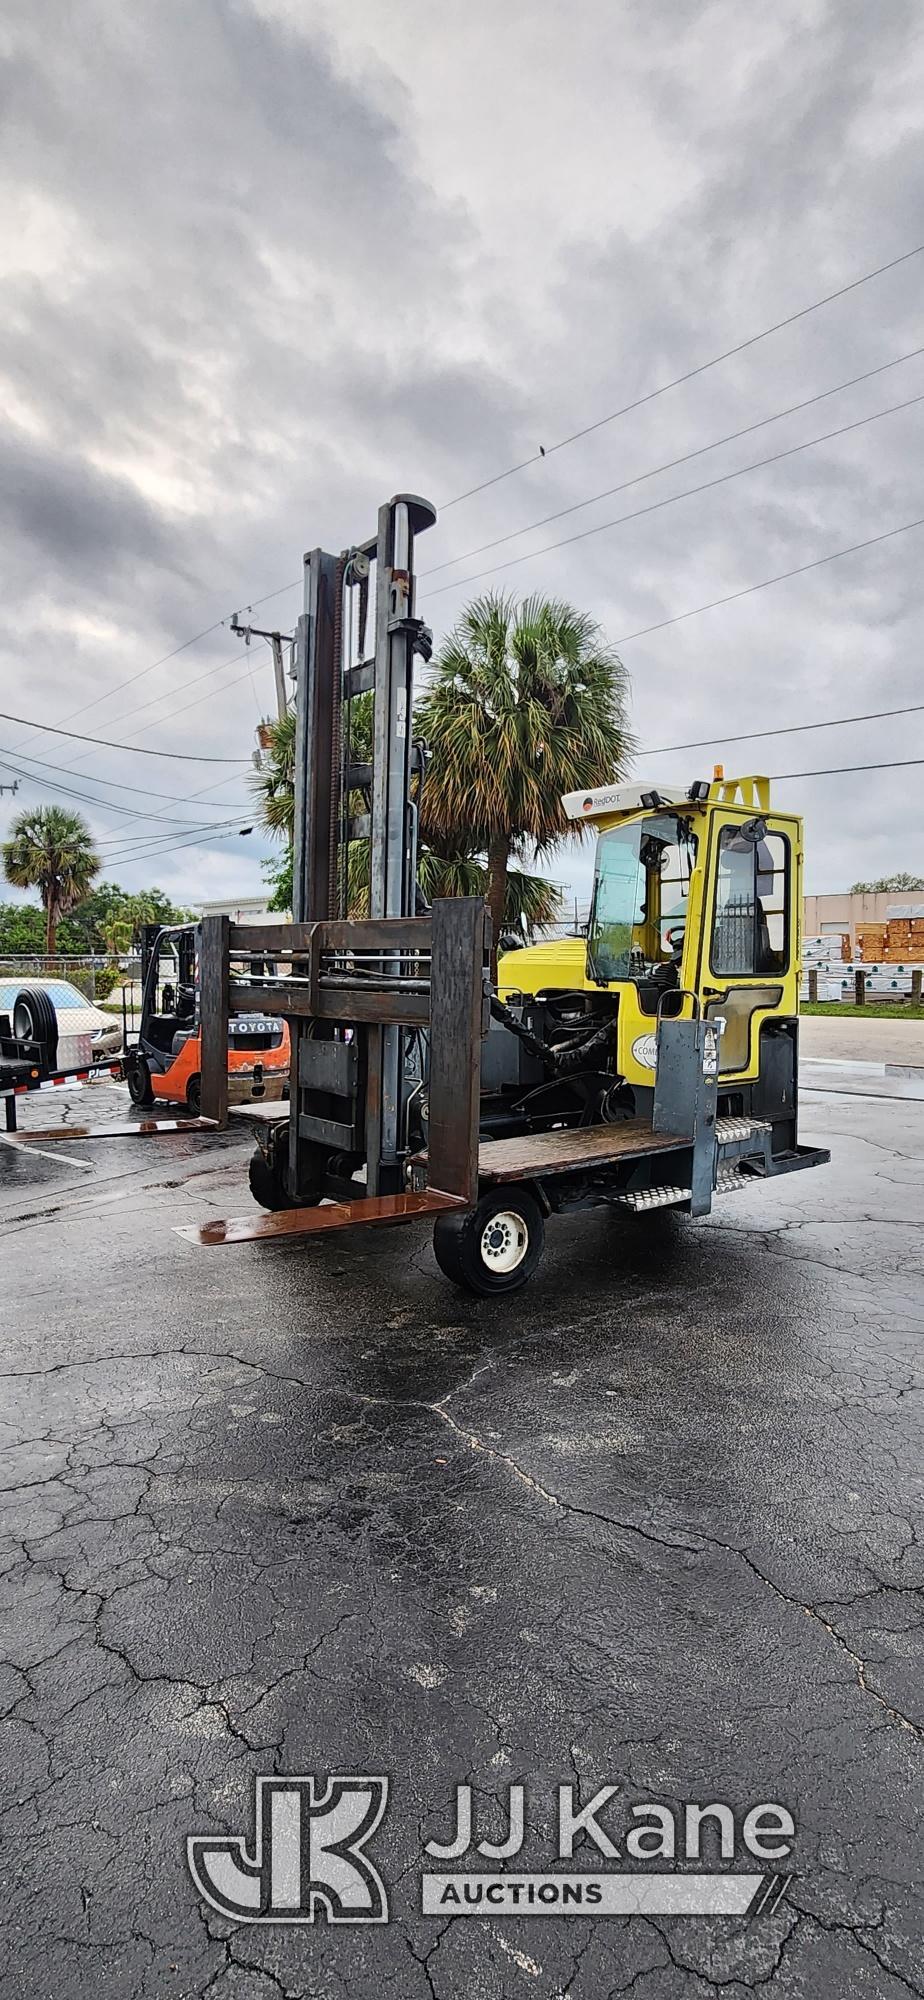 (Riviera Beach, FL) 2008 COMBI-LIFT CL80110DA50 Solid Tired Forklift, Loading Assistance Available R